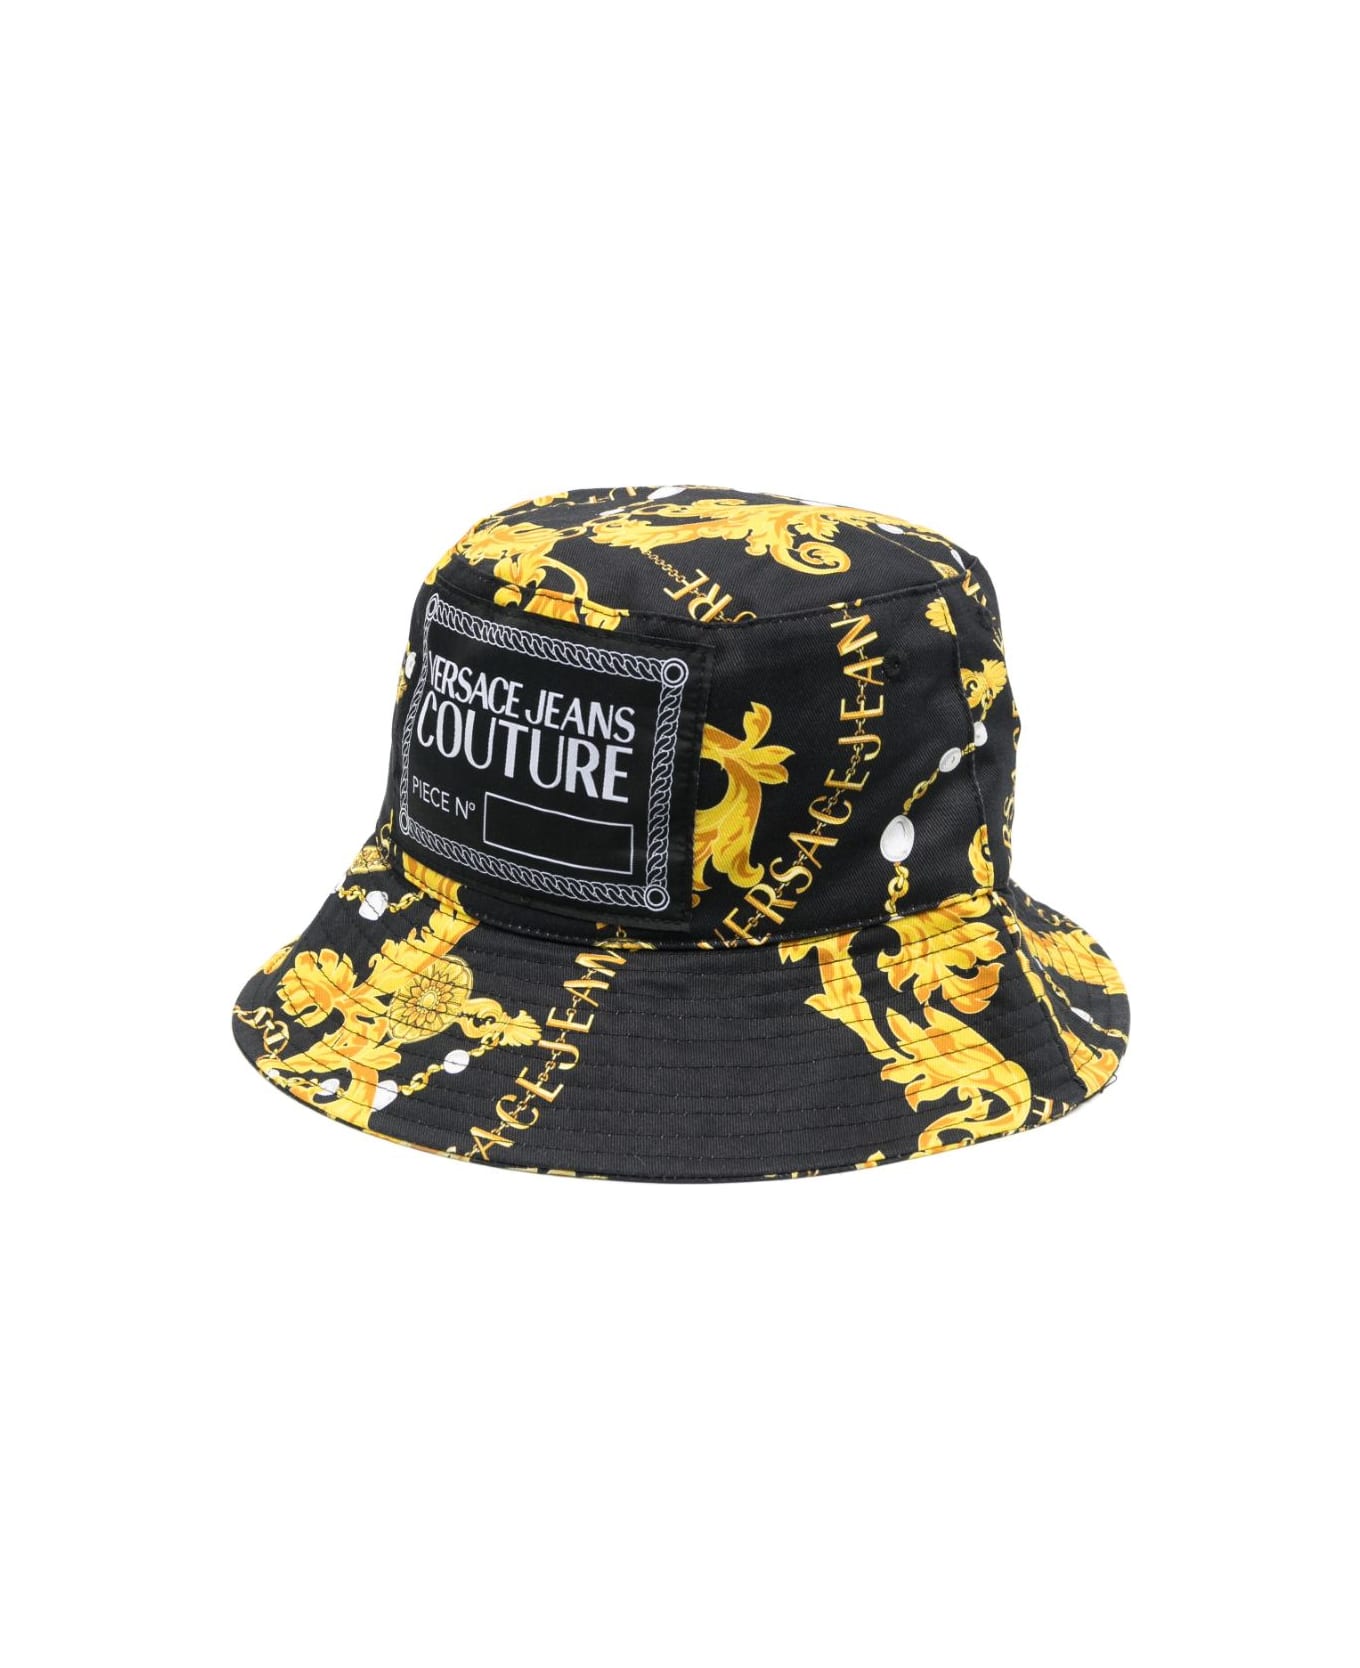 Versace Jeans Couture Printed Chain Bucket Hat - Black Gold